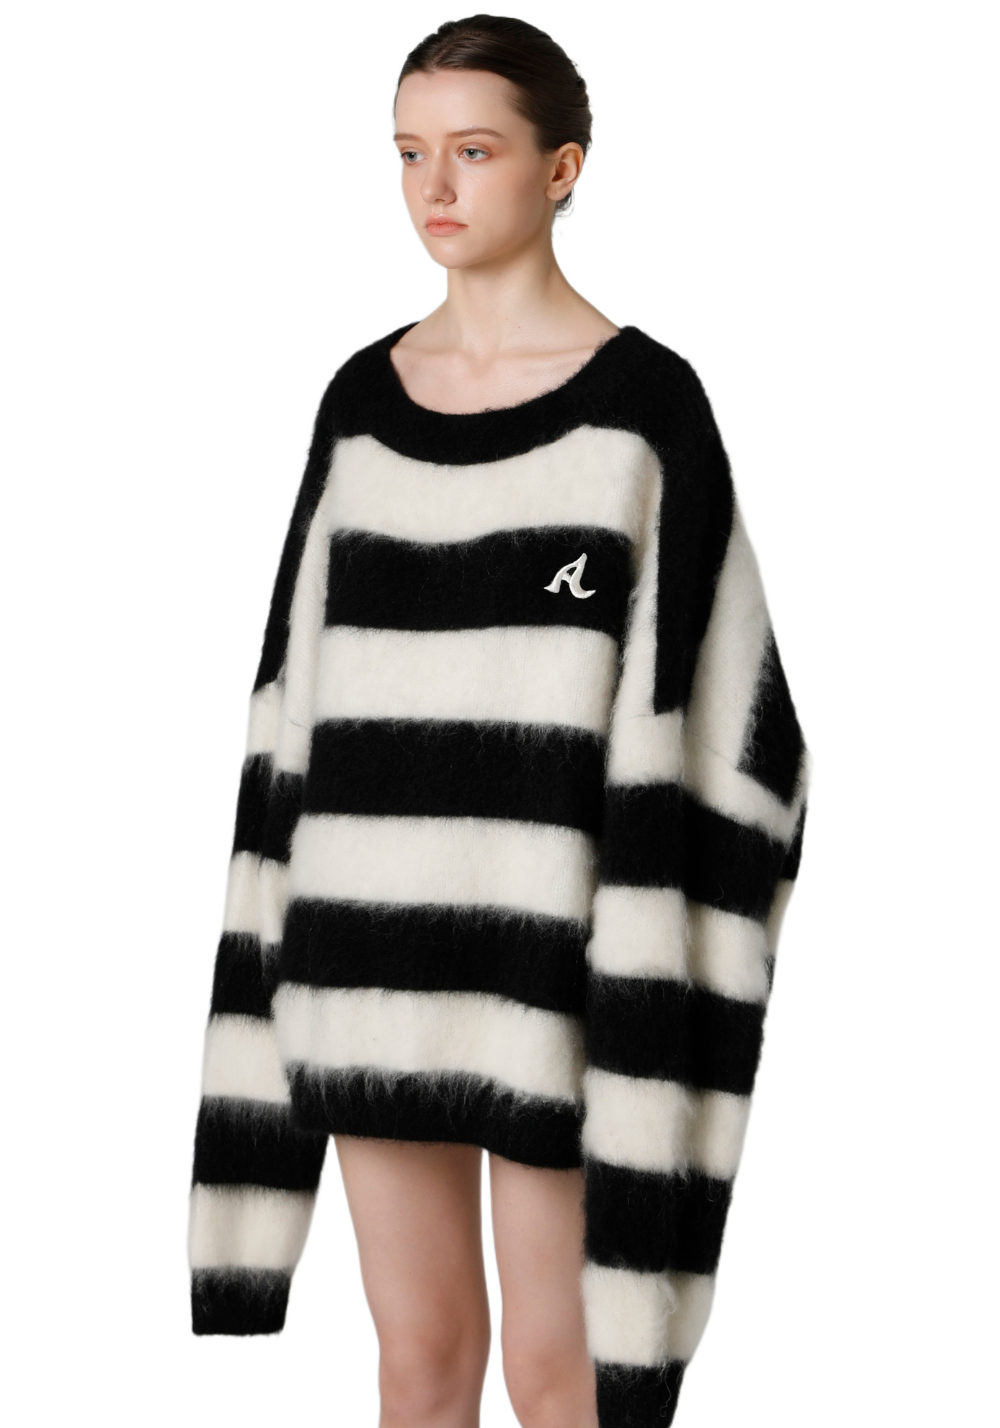 Black And White Striped Sweater - PSYLOS 1